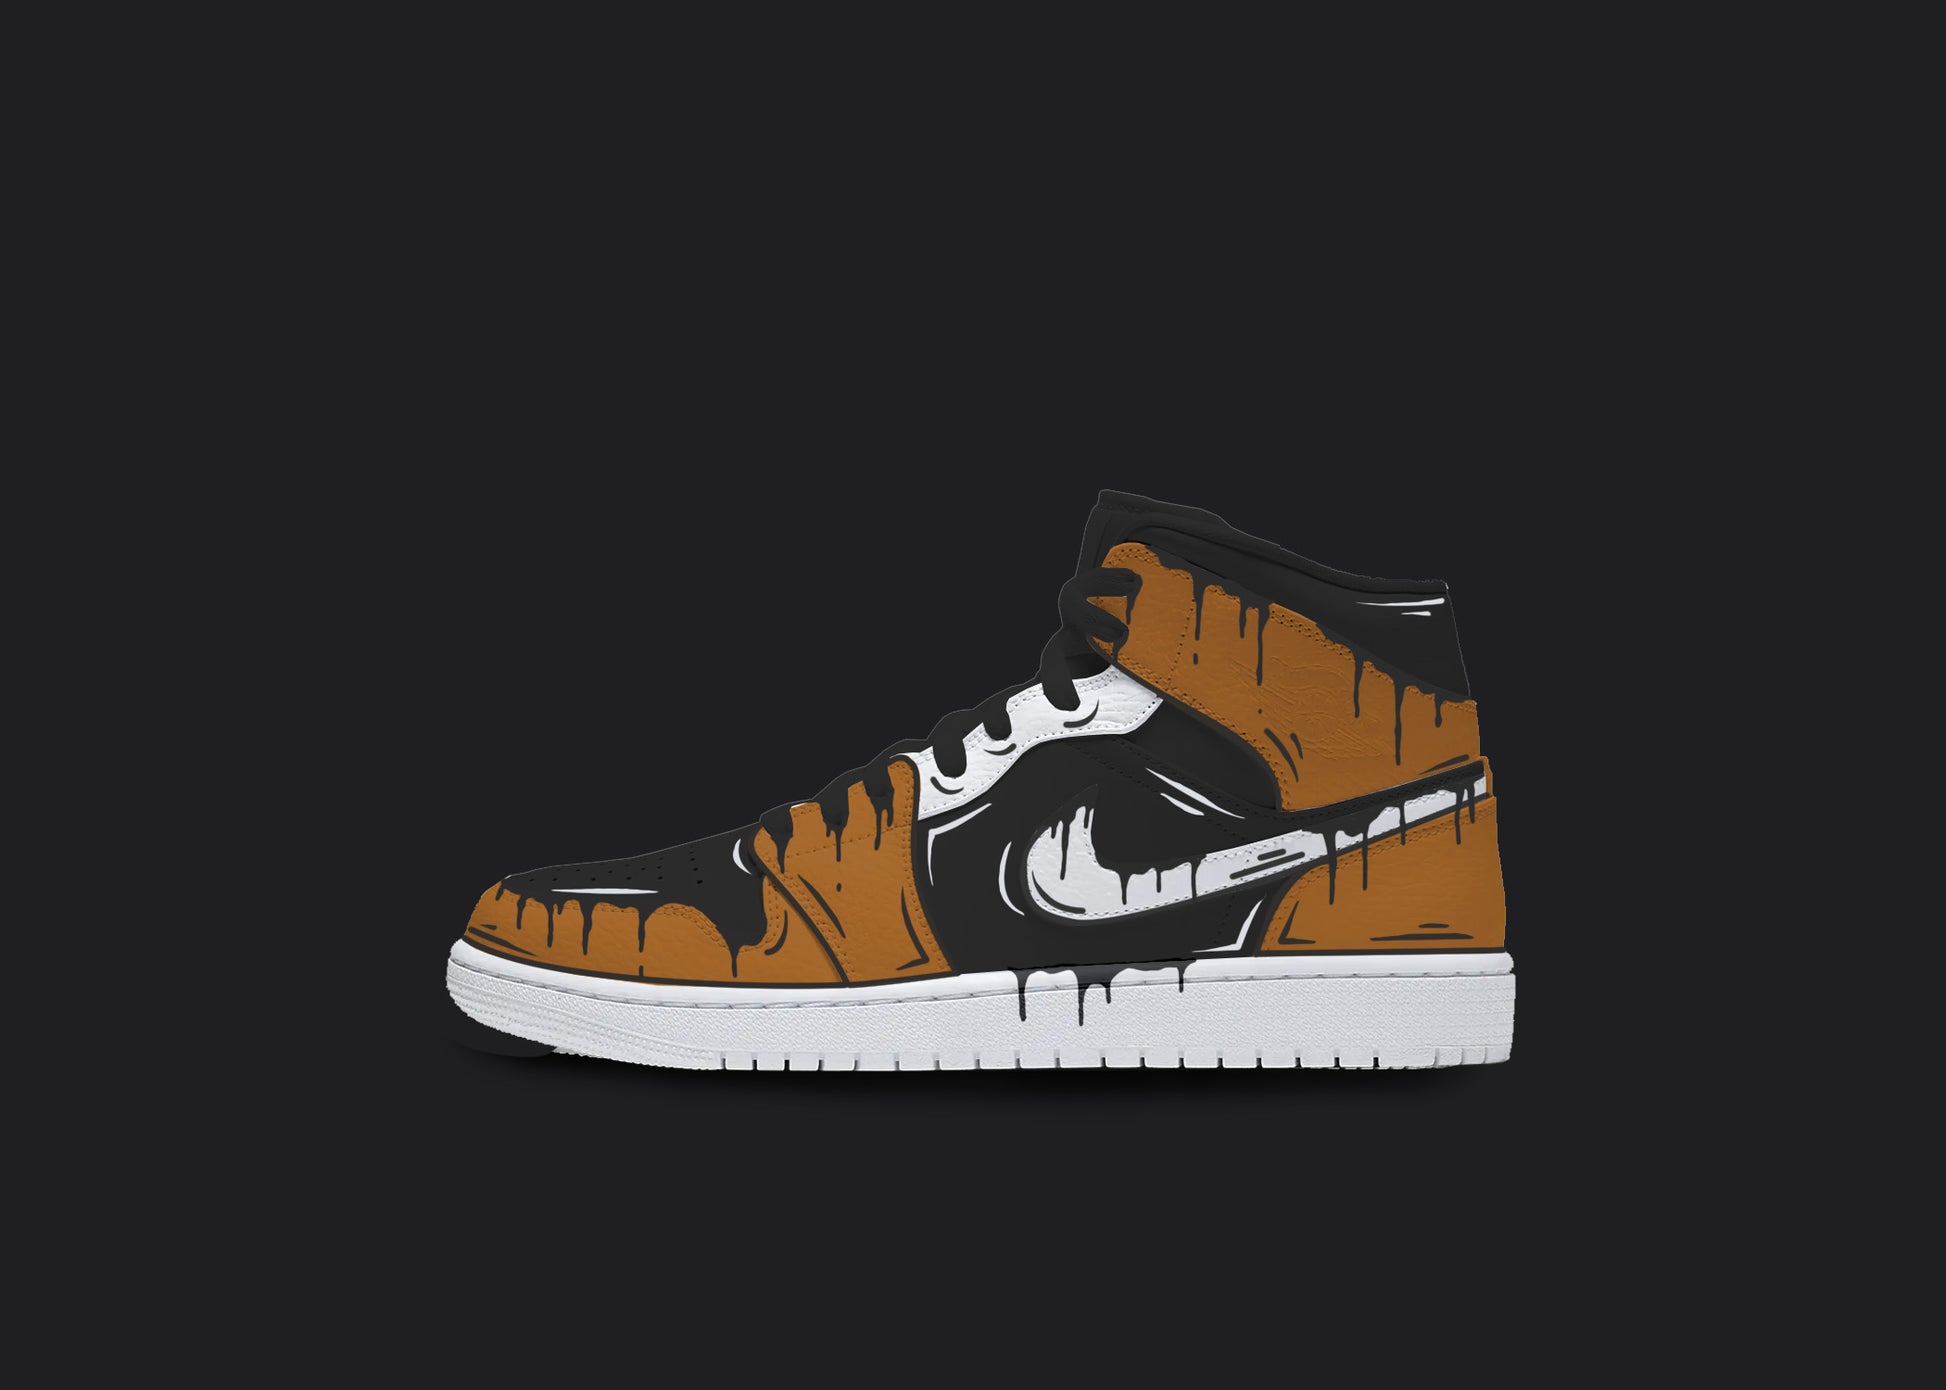 Custom Nike jordan 1s are displayed on a dark blank background. The sneakers feature a white sole with various custom painted sections. The Nike logo has a black dripping design, whereas the front strip and back of the sneakers have a orange and black cartoon design. The custom sneakers' laces are in black color.